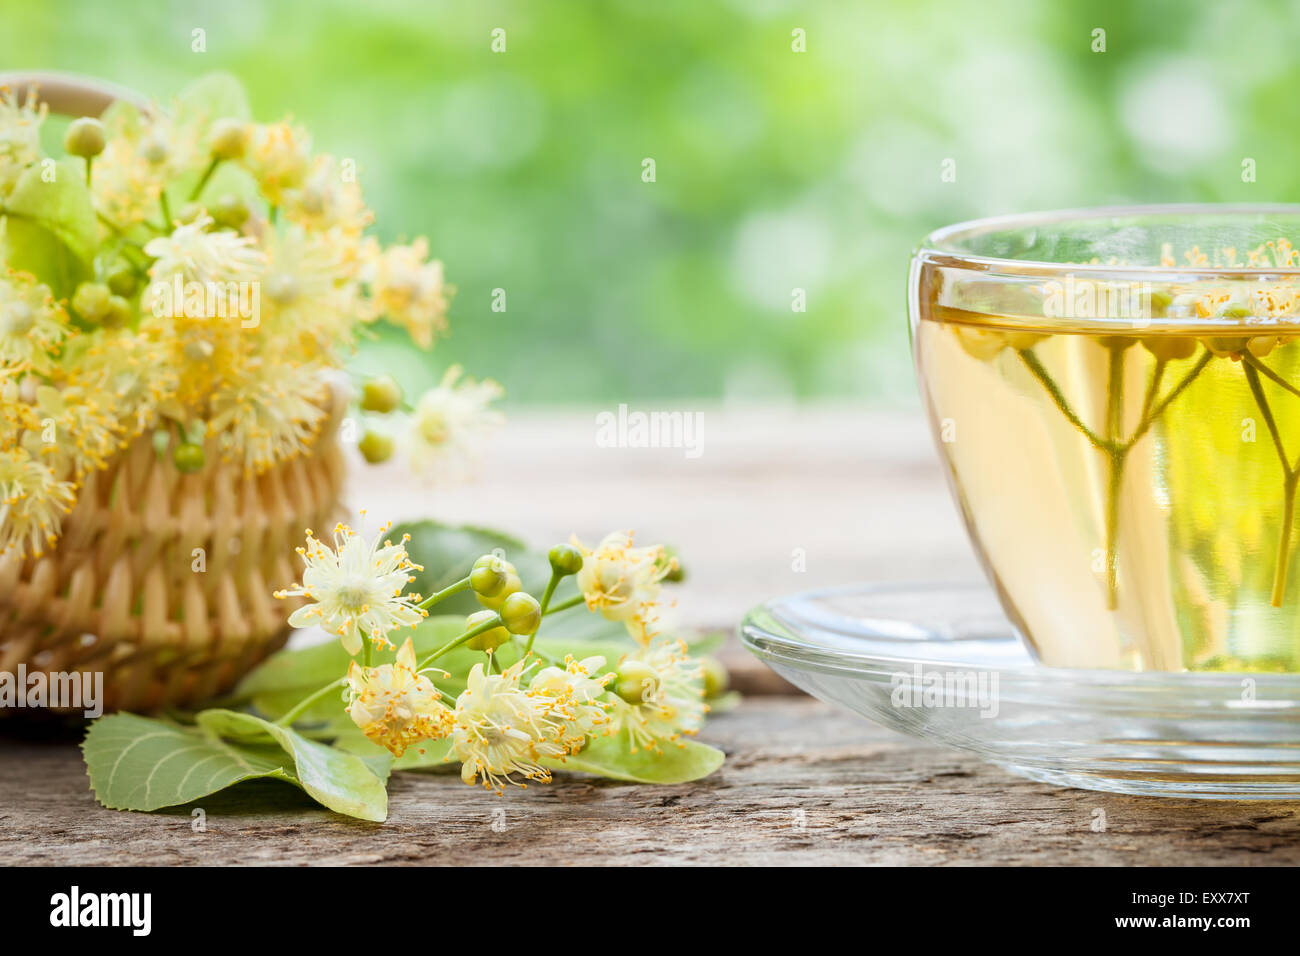 Cup of linden tea and wicker basket with lime flowers, herbal medicine. Stock Photo